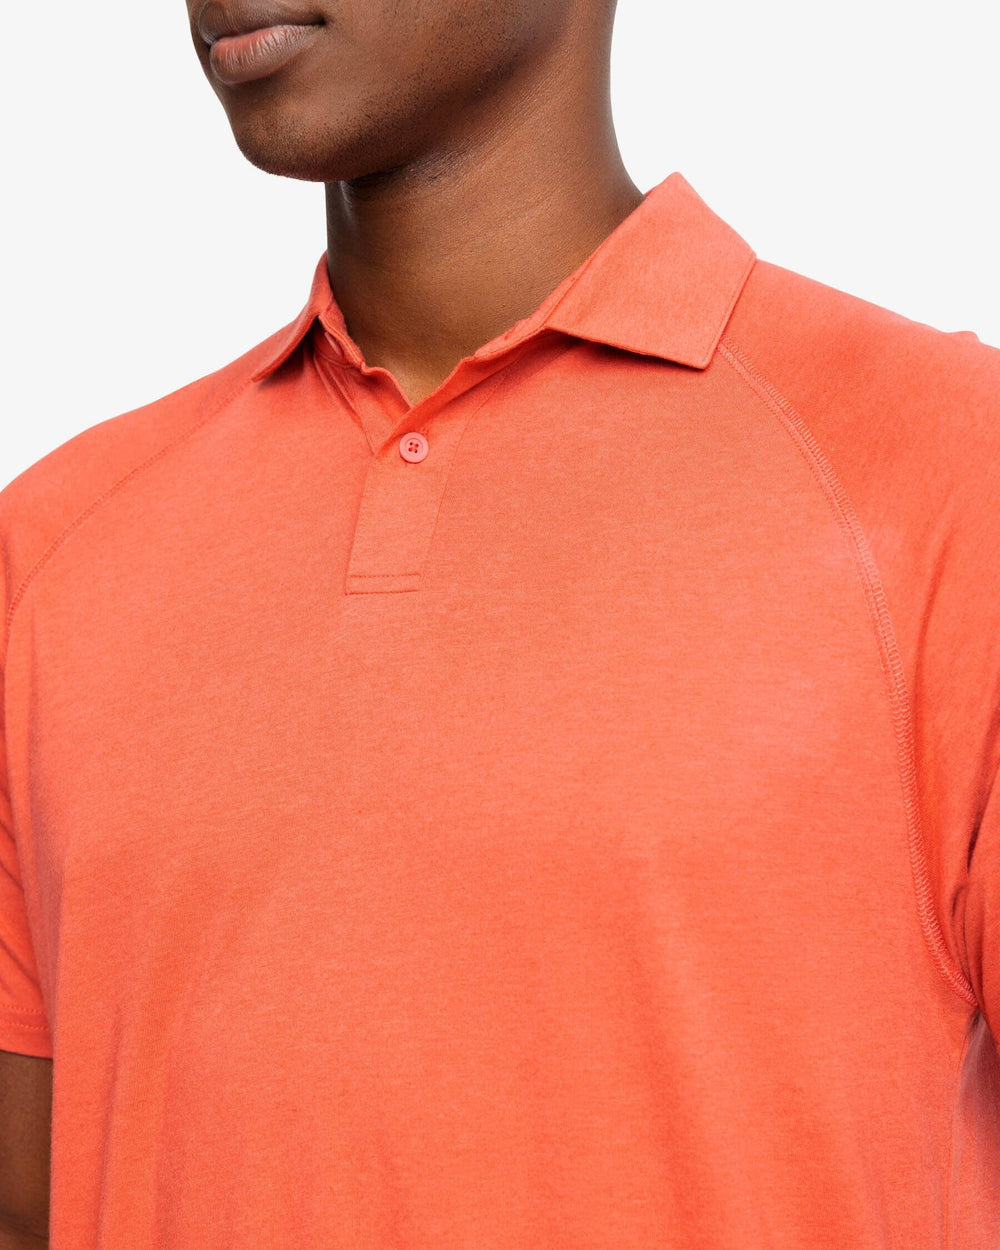 The detail view of the Racquet Performance Polo Shirt by Southern Tide - Mineral Red